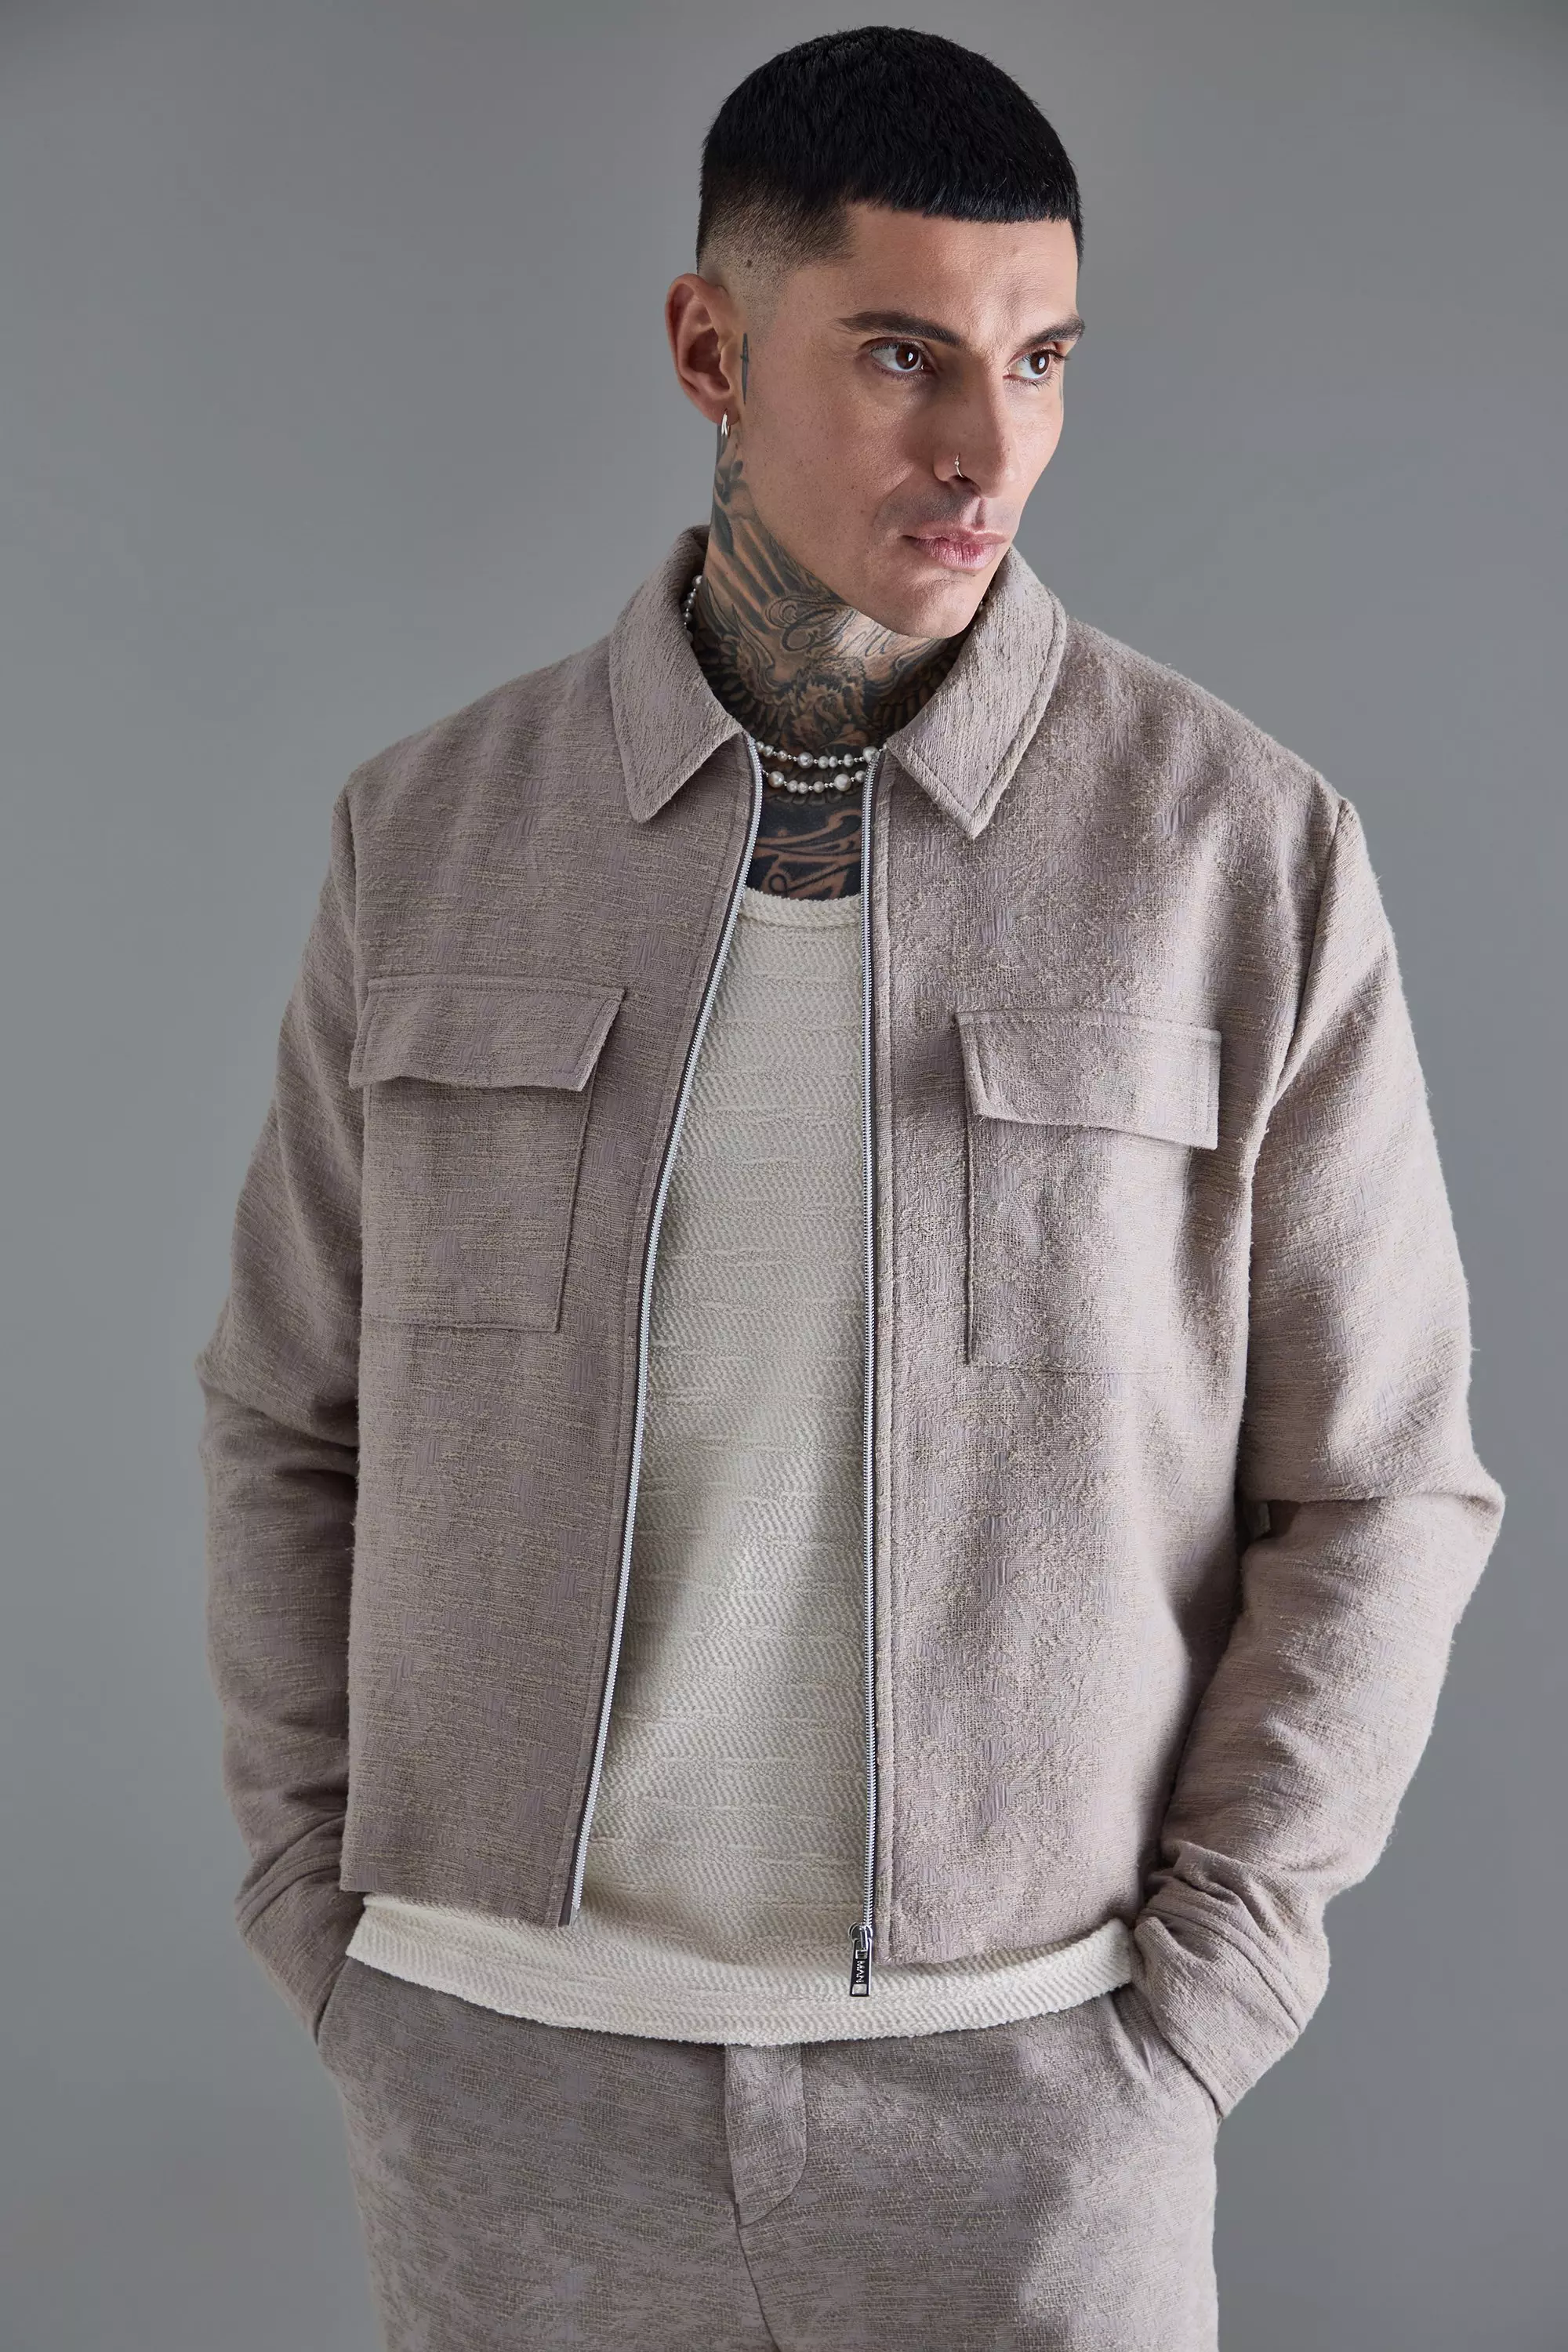 Taupe Beige Tall Textured Cotton Jacquard Smart Cargo Jacket